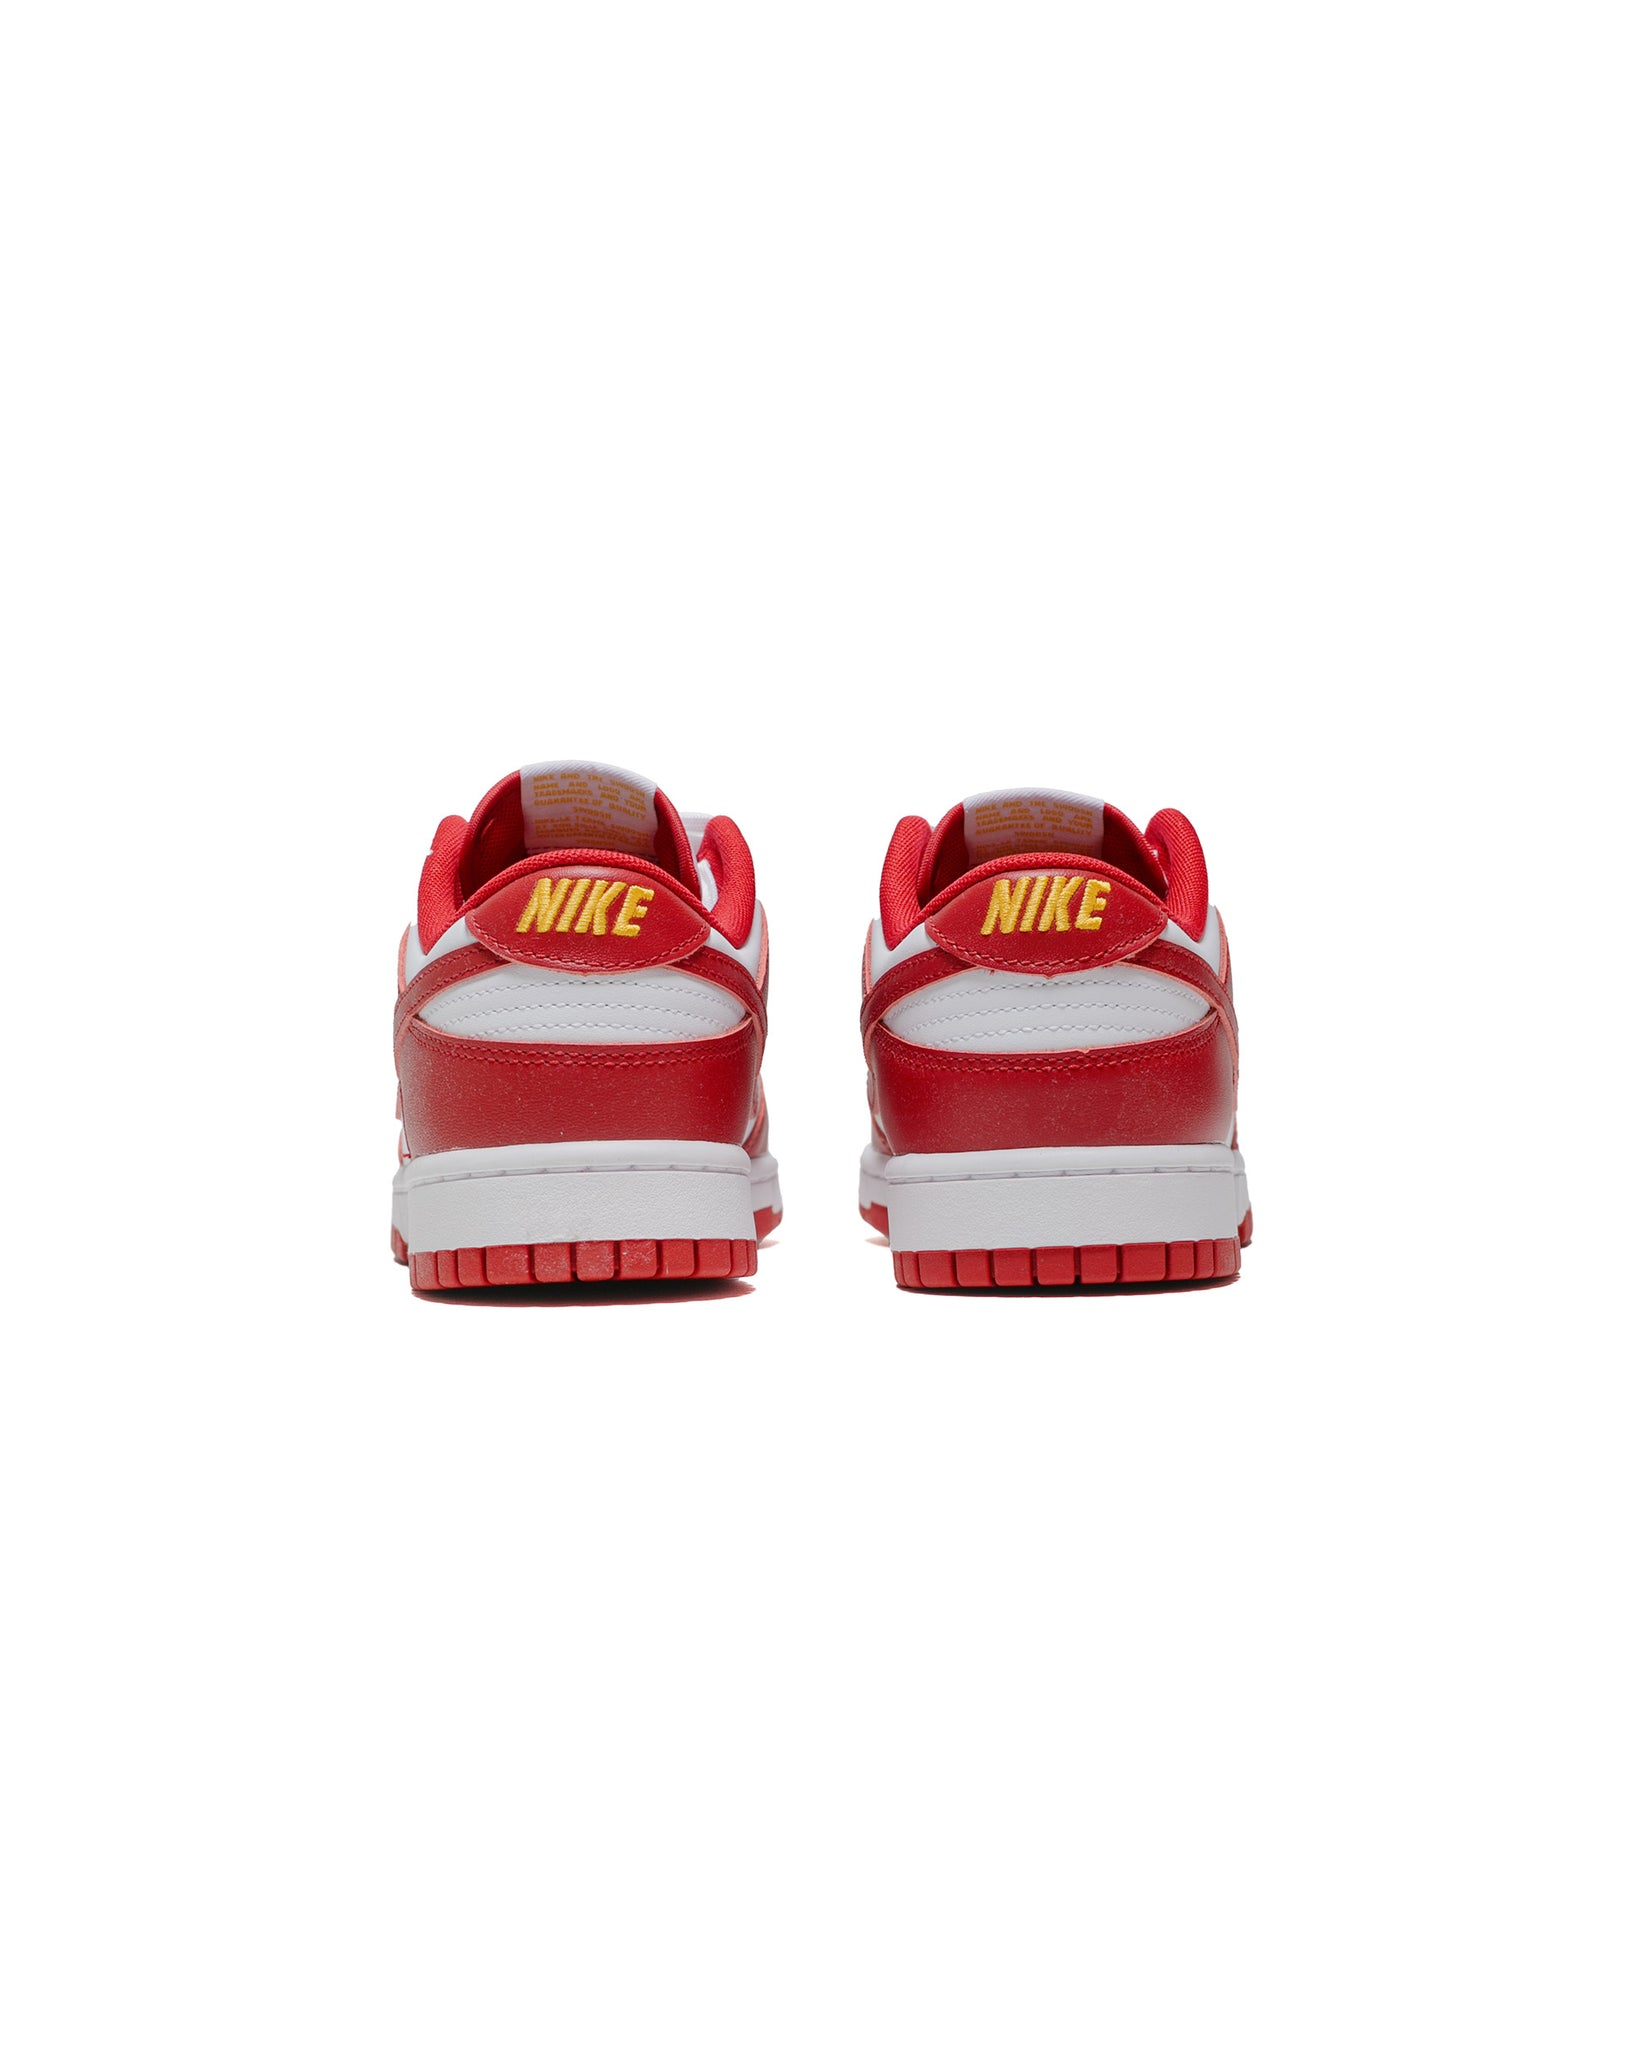 Nike Dunk Low Retro Gym Red/White back